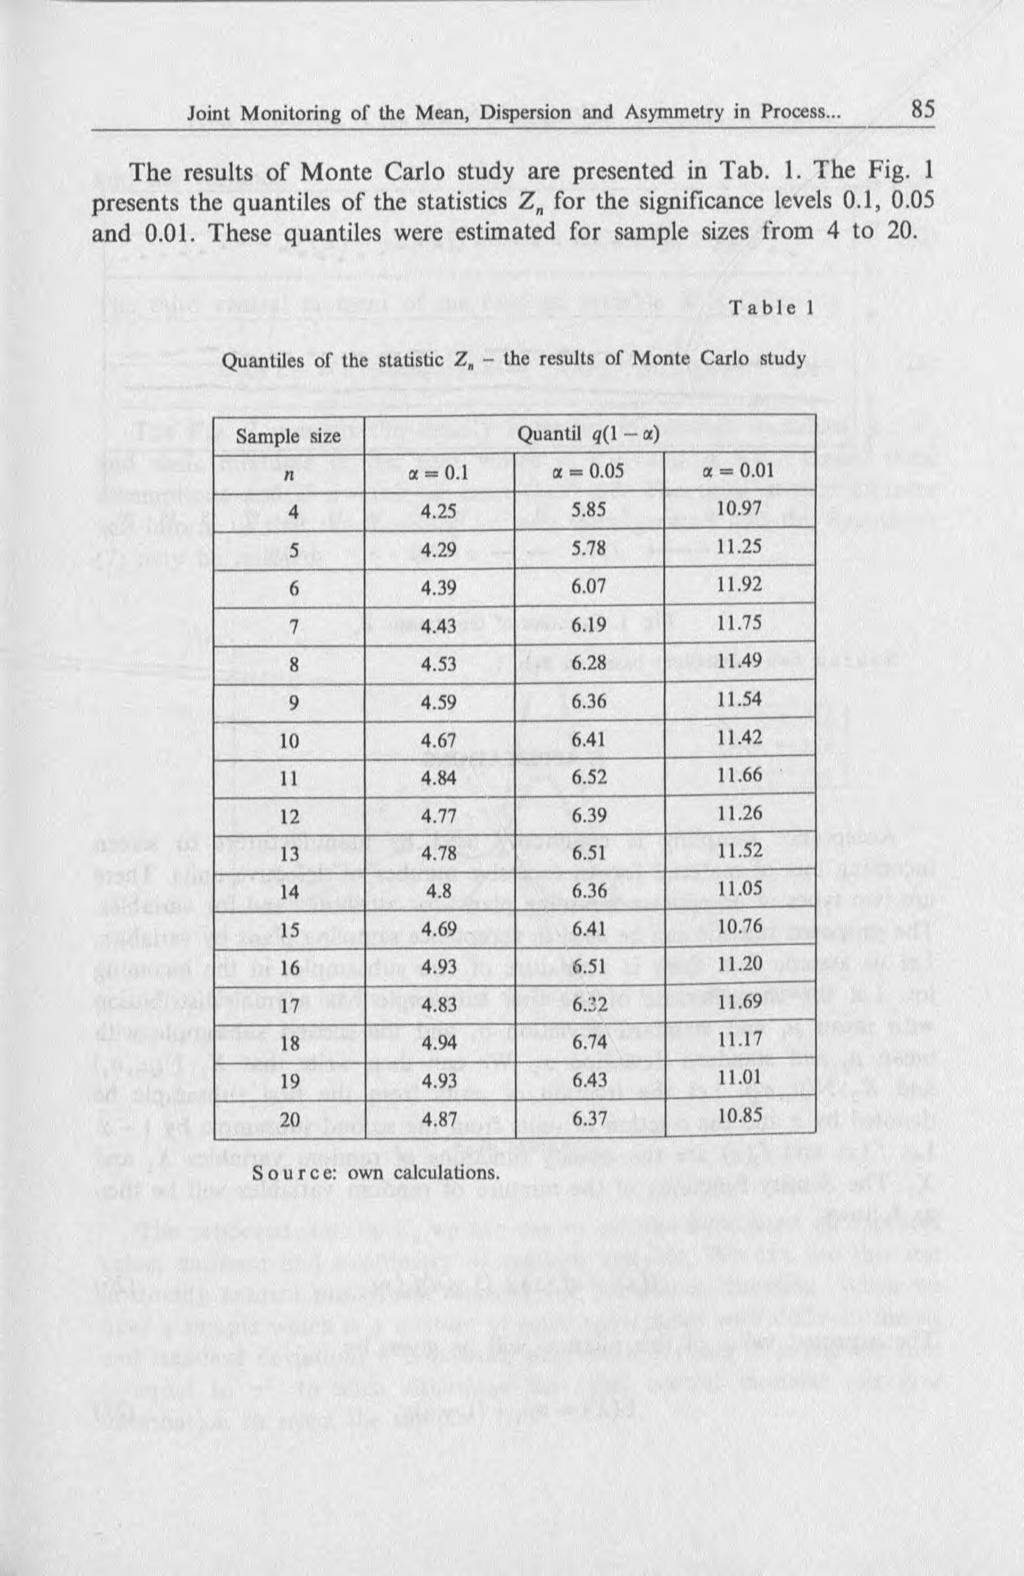 The results of M onte Carlo study are presented in Tab. 1. The Fig. 1 presents the quantiles of the statistics Z for the significance levels 0.1, 0.05 and 0.01.